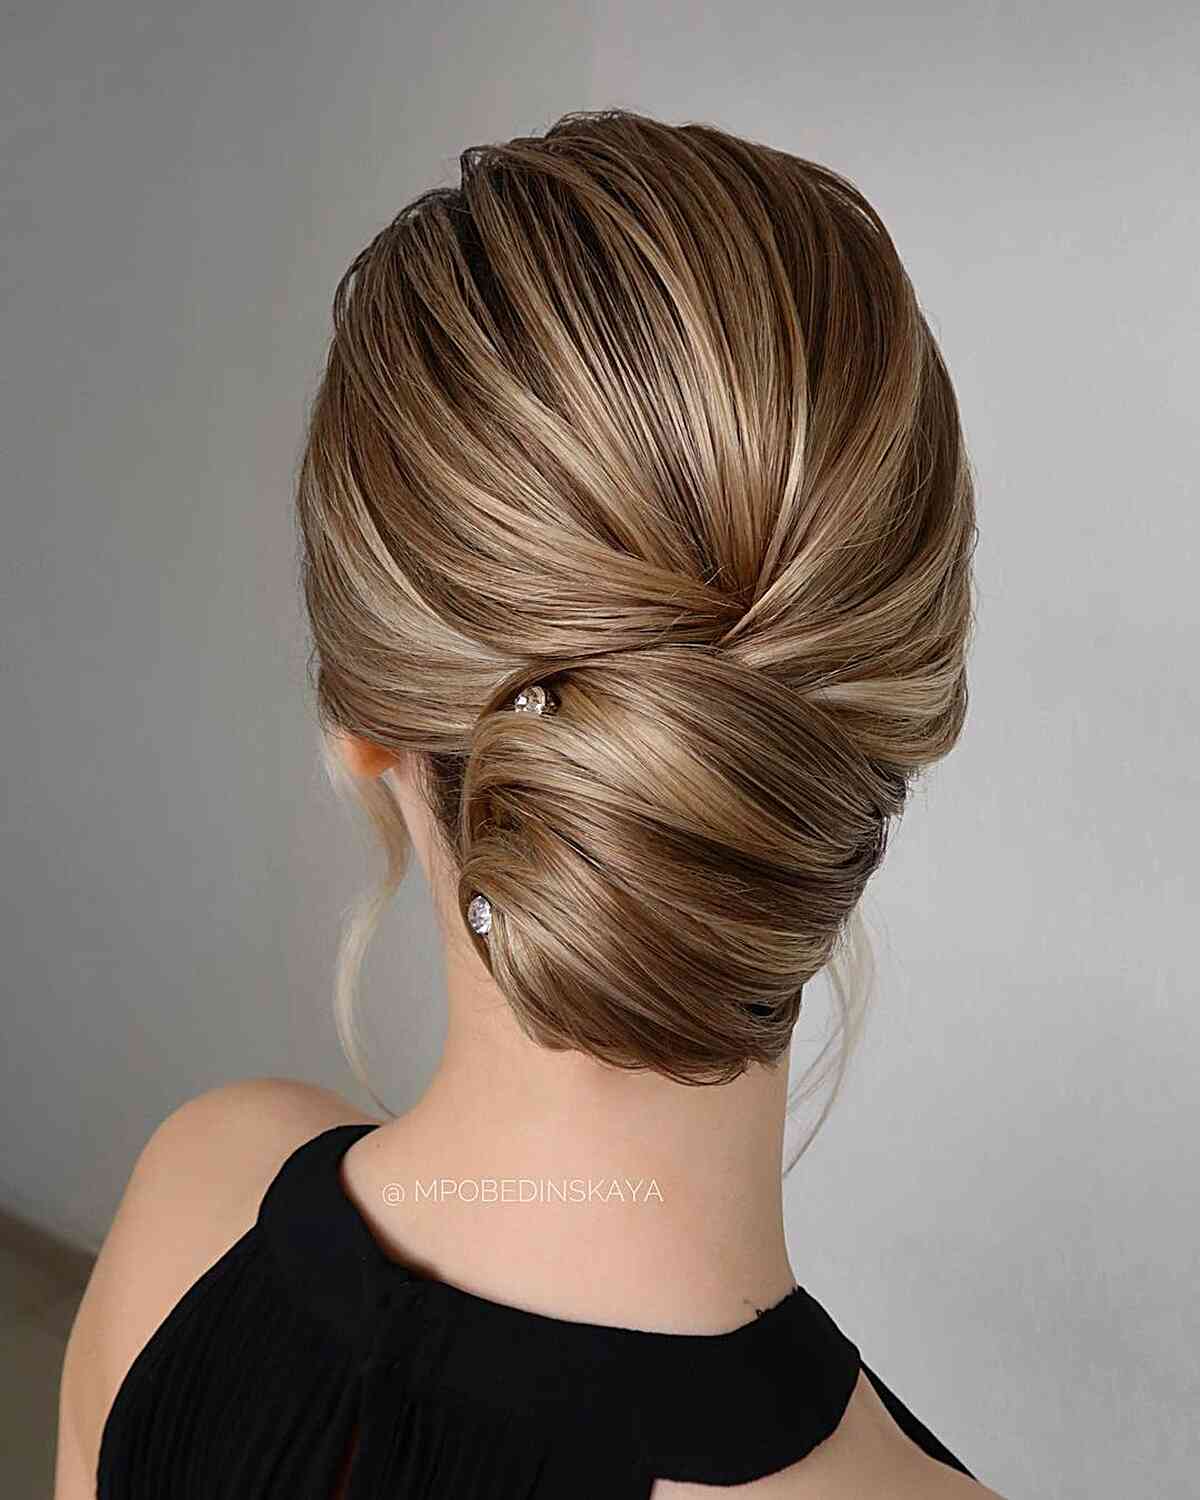 15 Easy Hairstyles For Long Hair To Try - Styleoholic